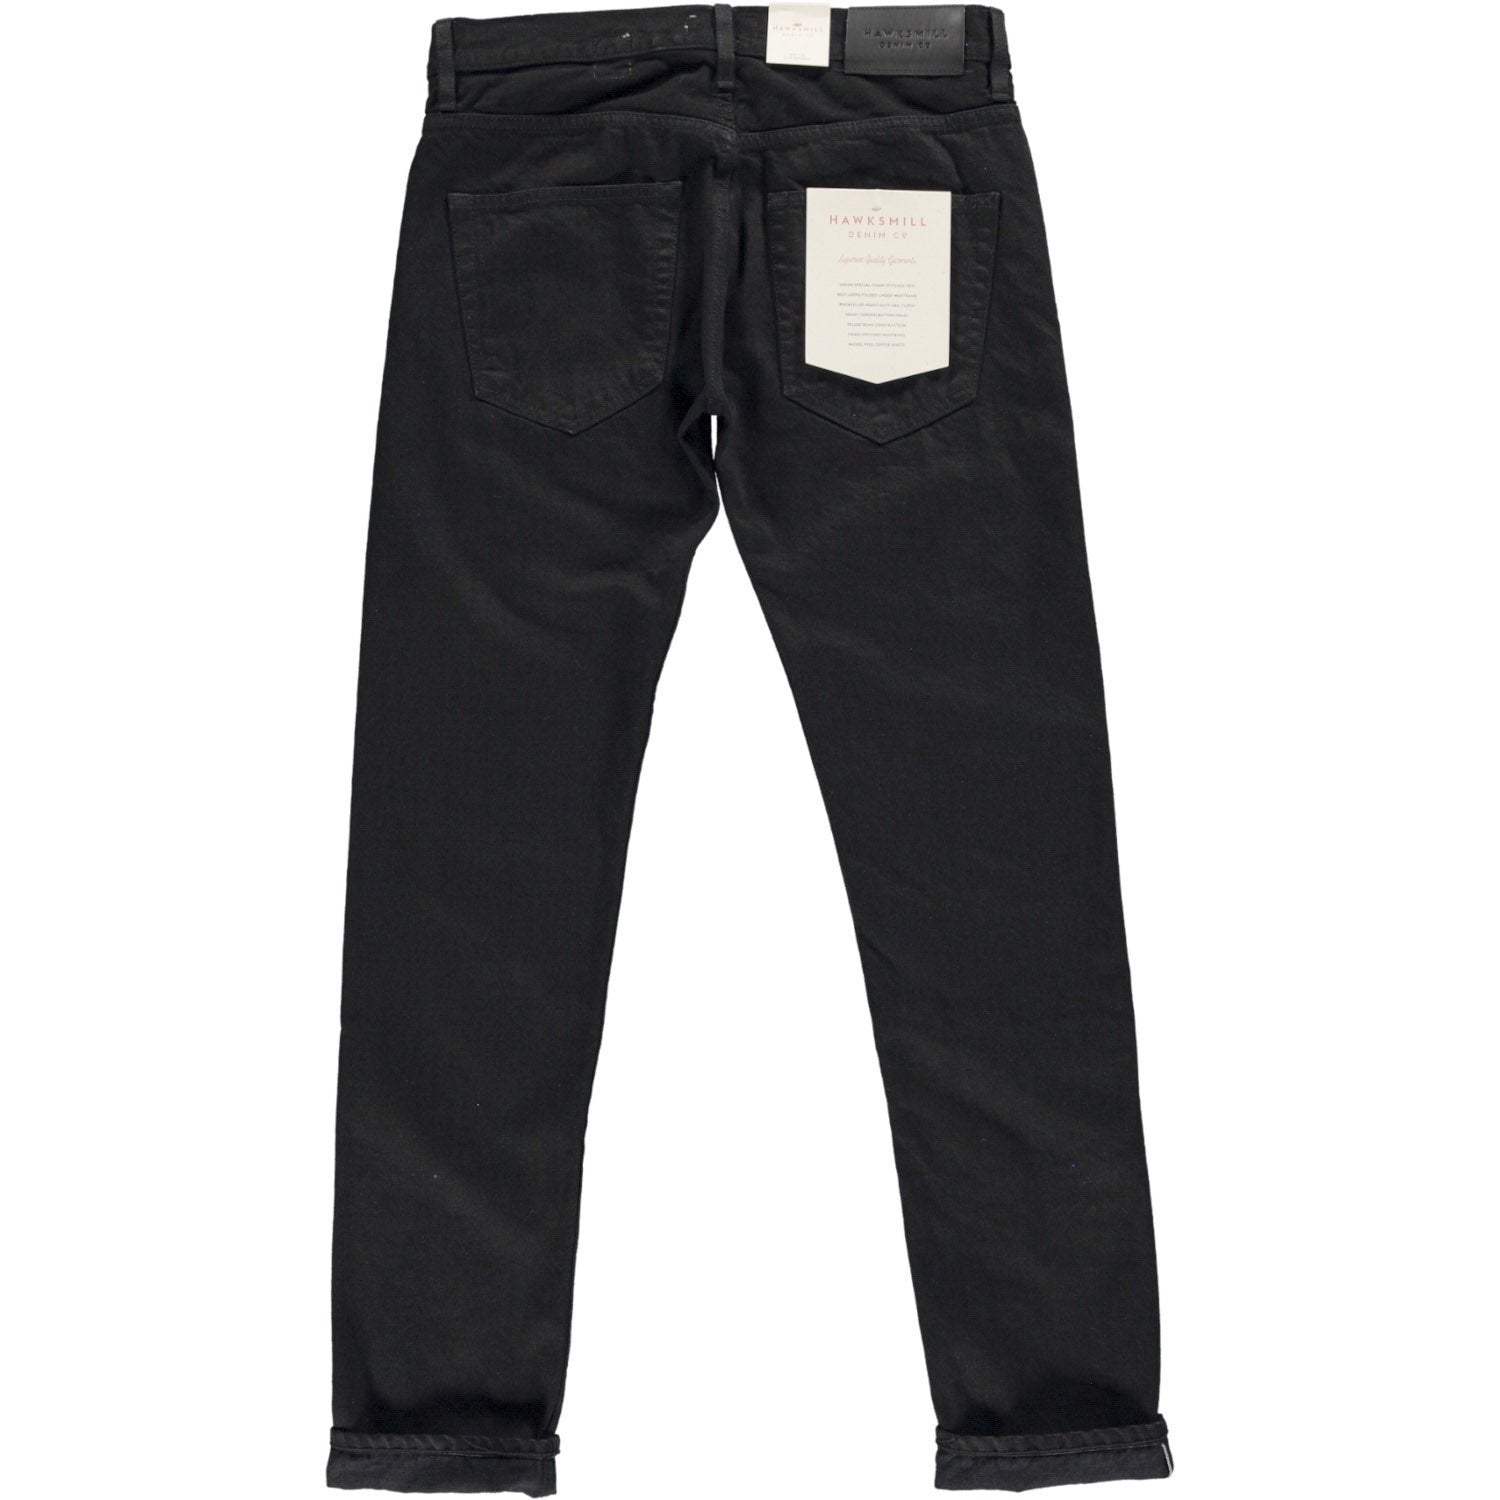 The Unbranded Brand Raw Denim Jeans - Relaxed 11oz Solid Black Stretch –  Upper Park